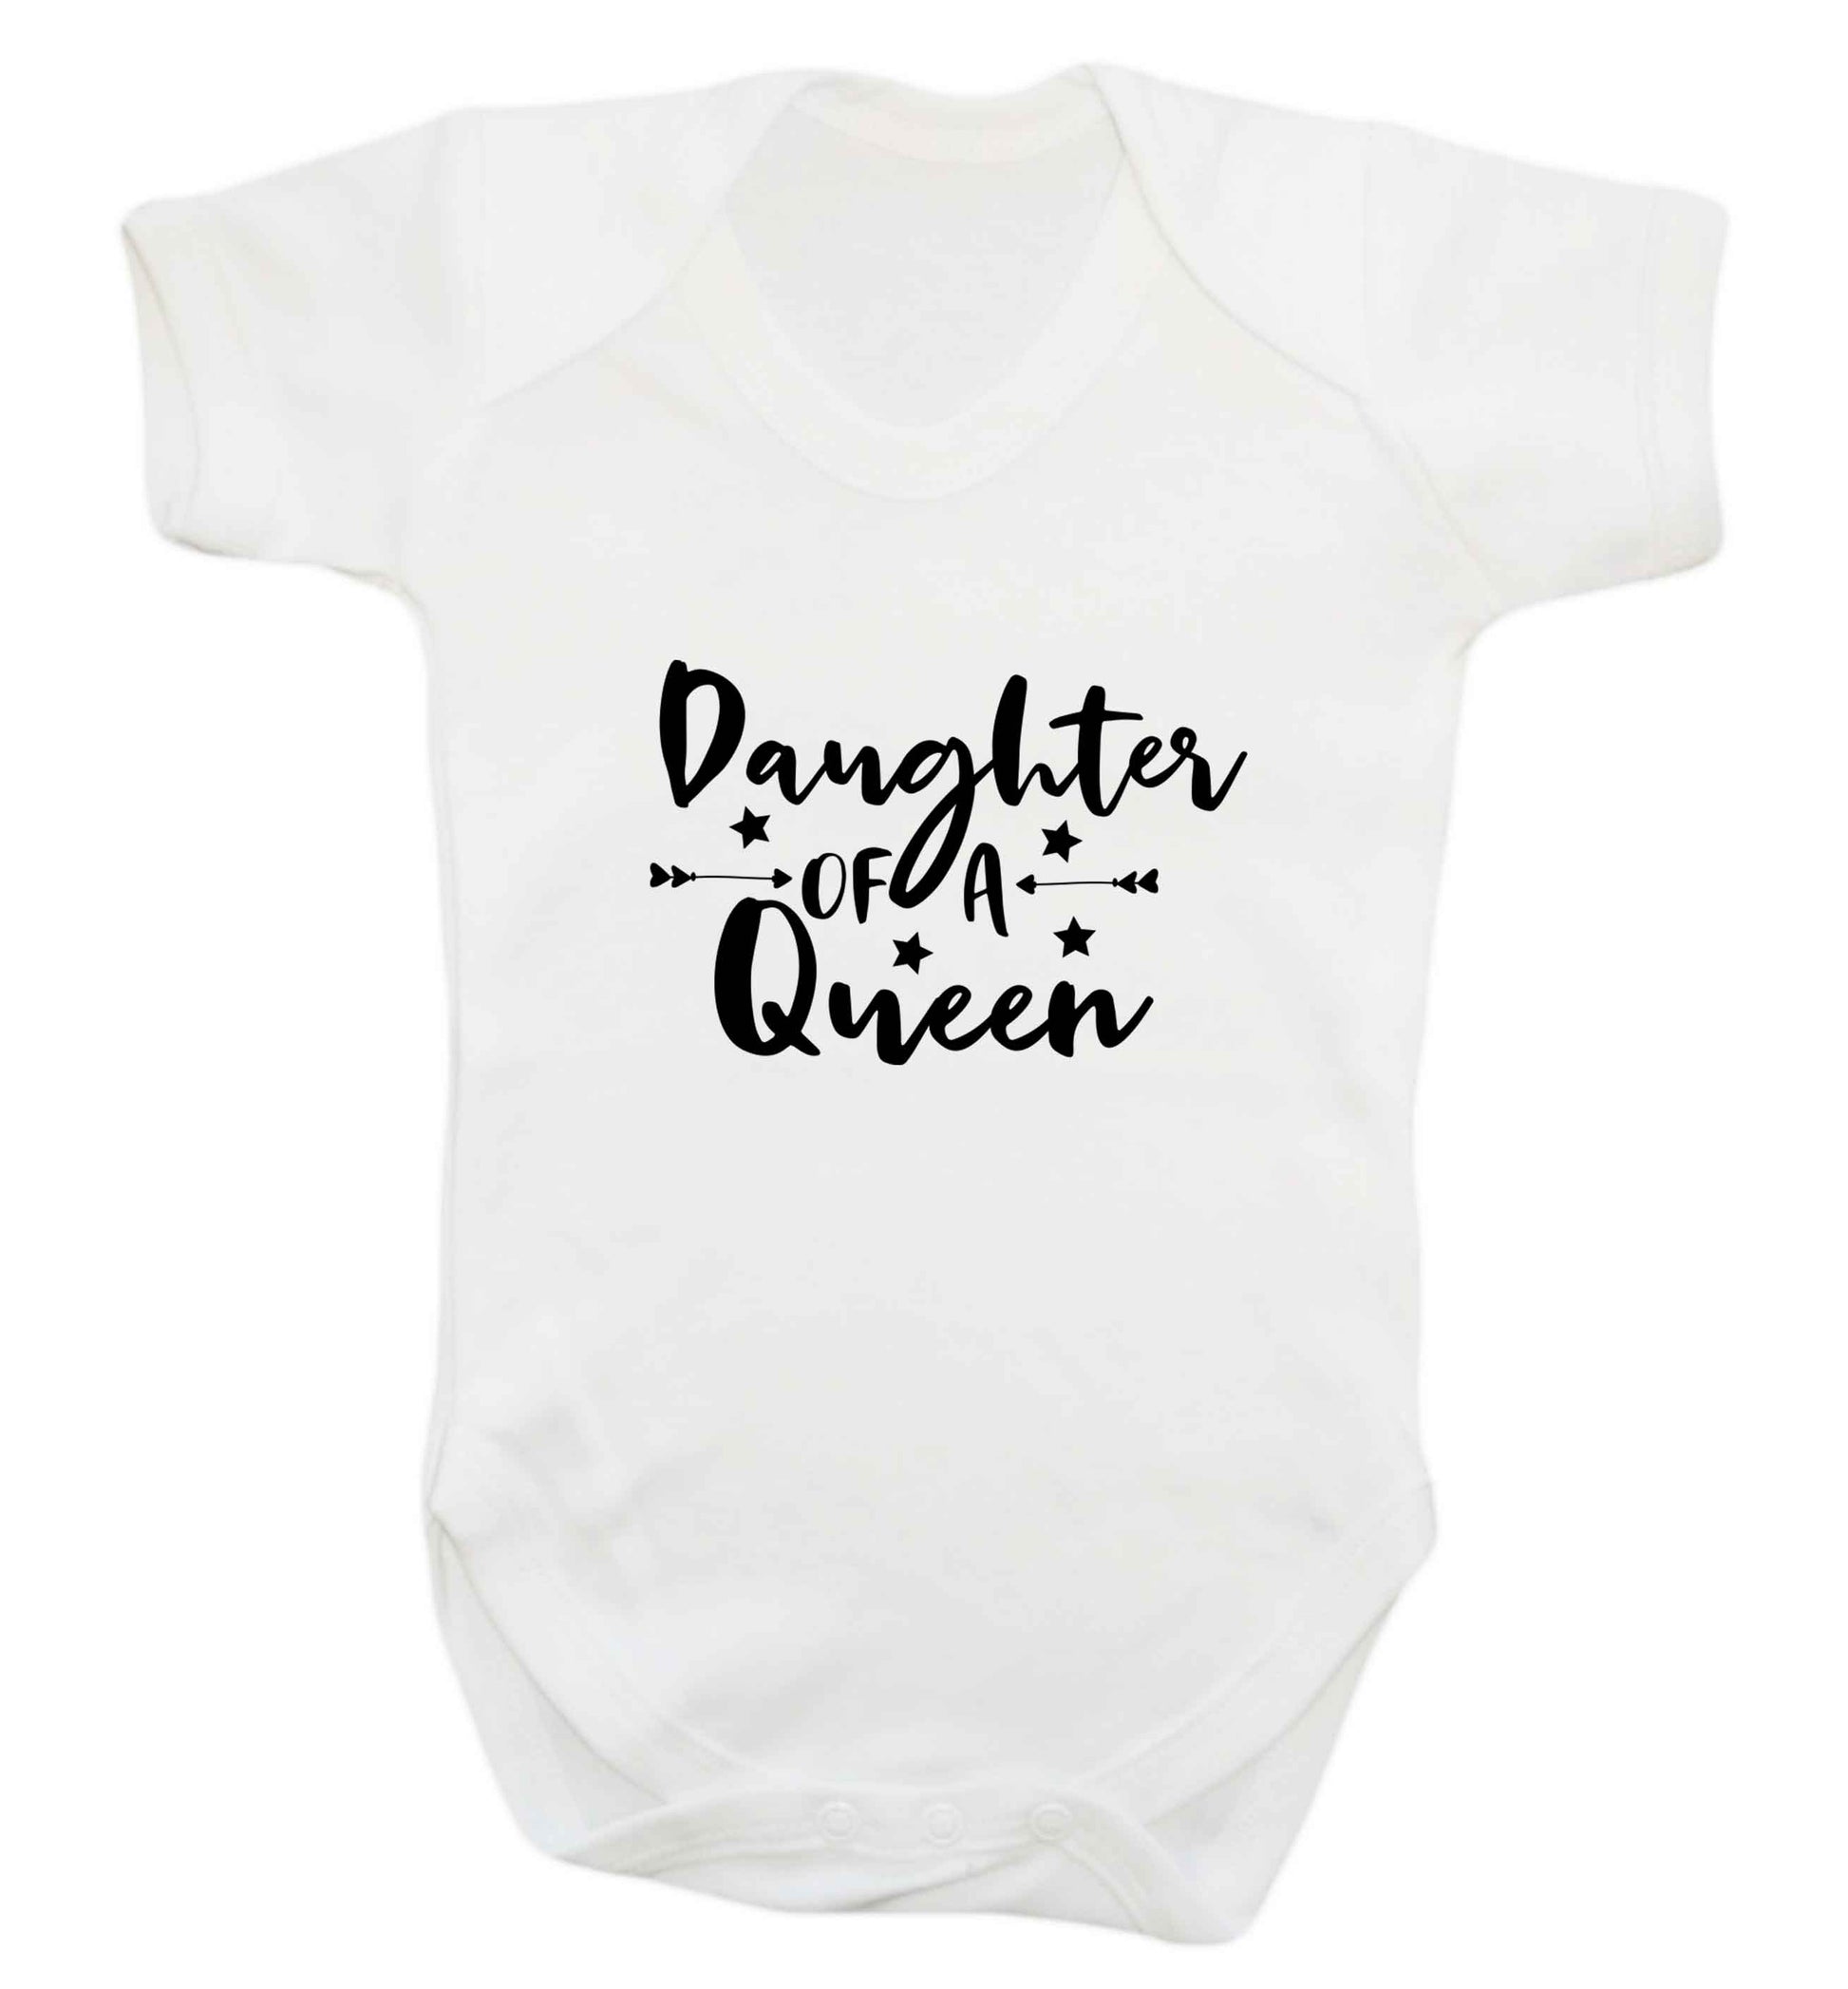 Daughter of a Queen baby vest white 18-24 months